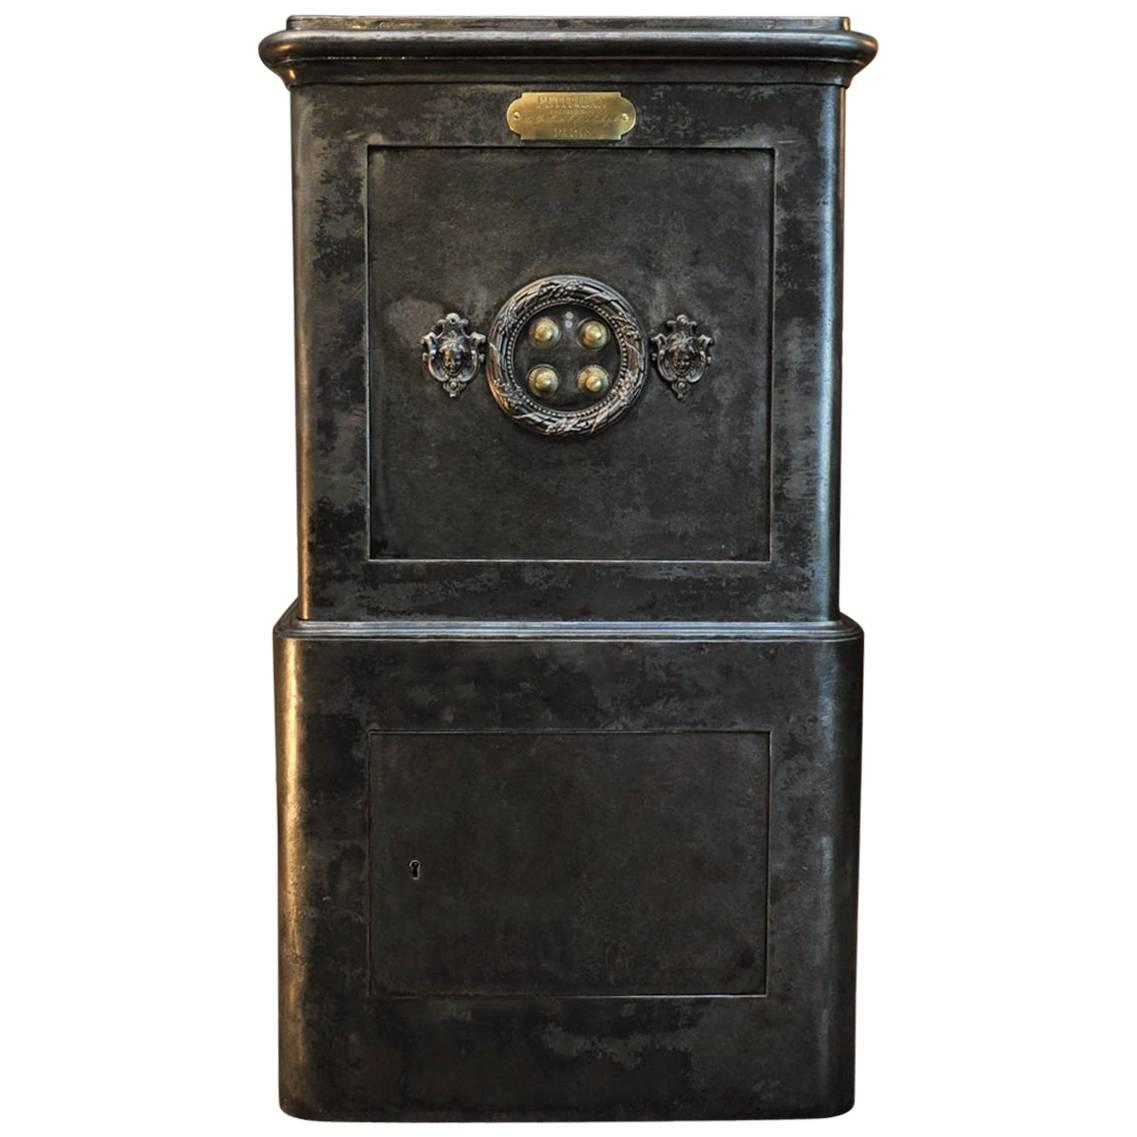 19th Century Iron and Wood Safe from Petitjean Paris with All Keys